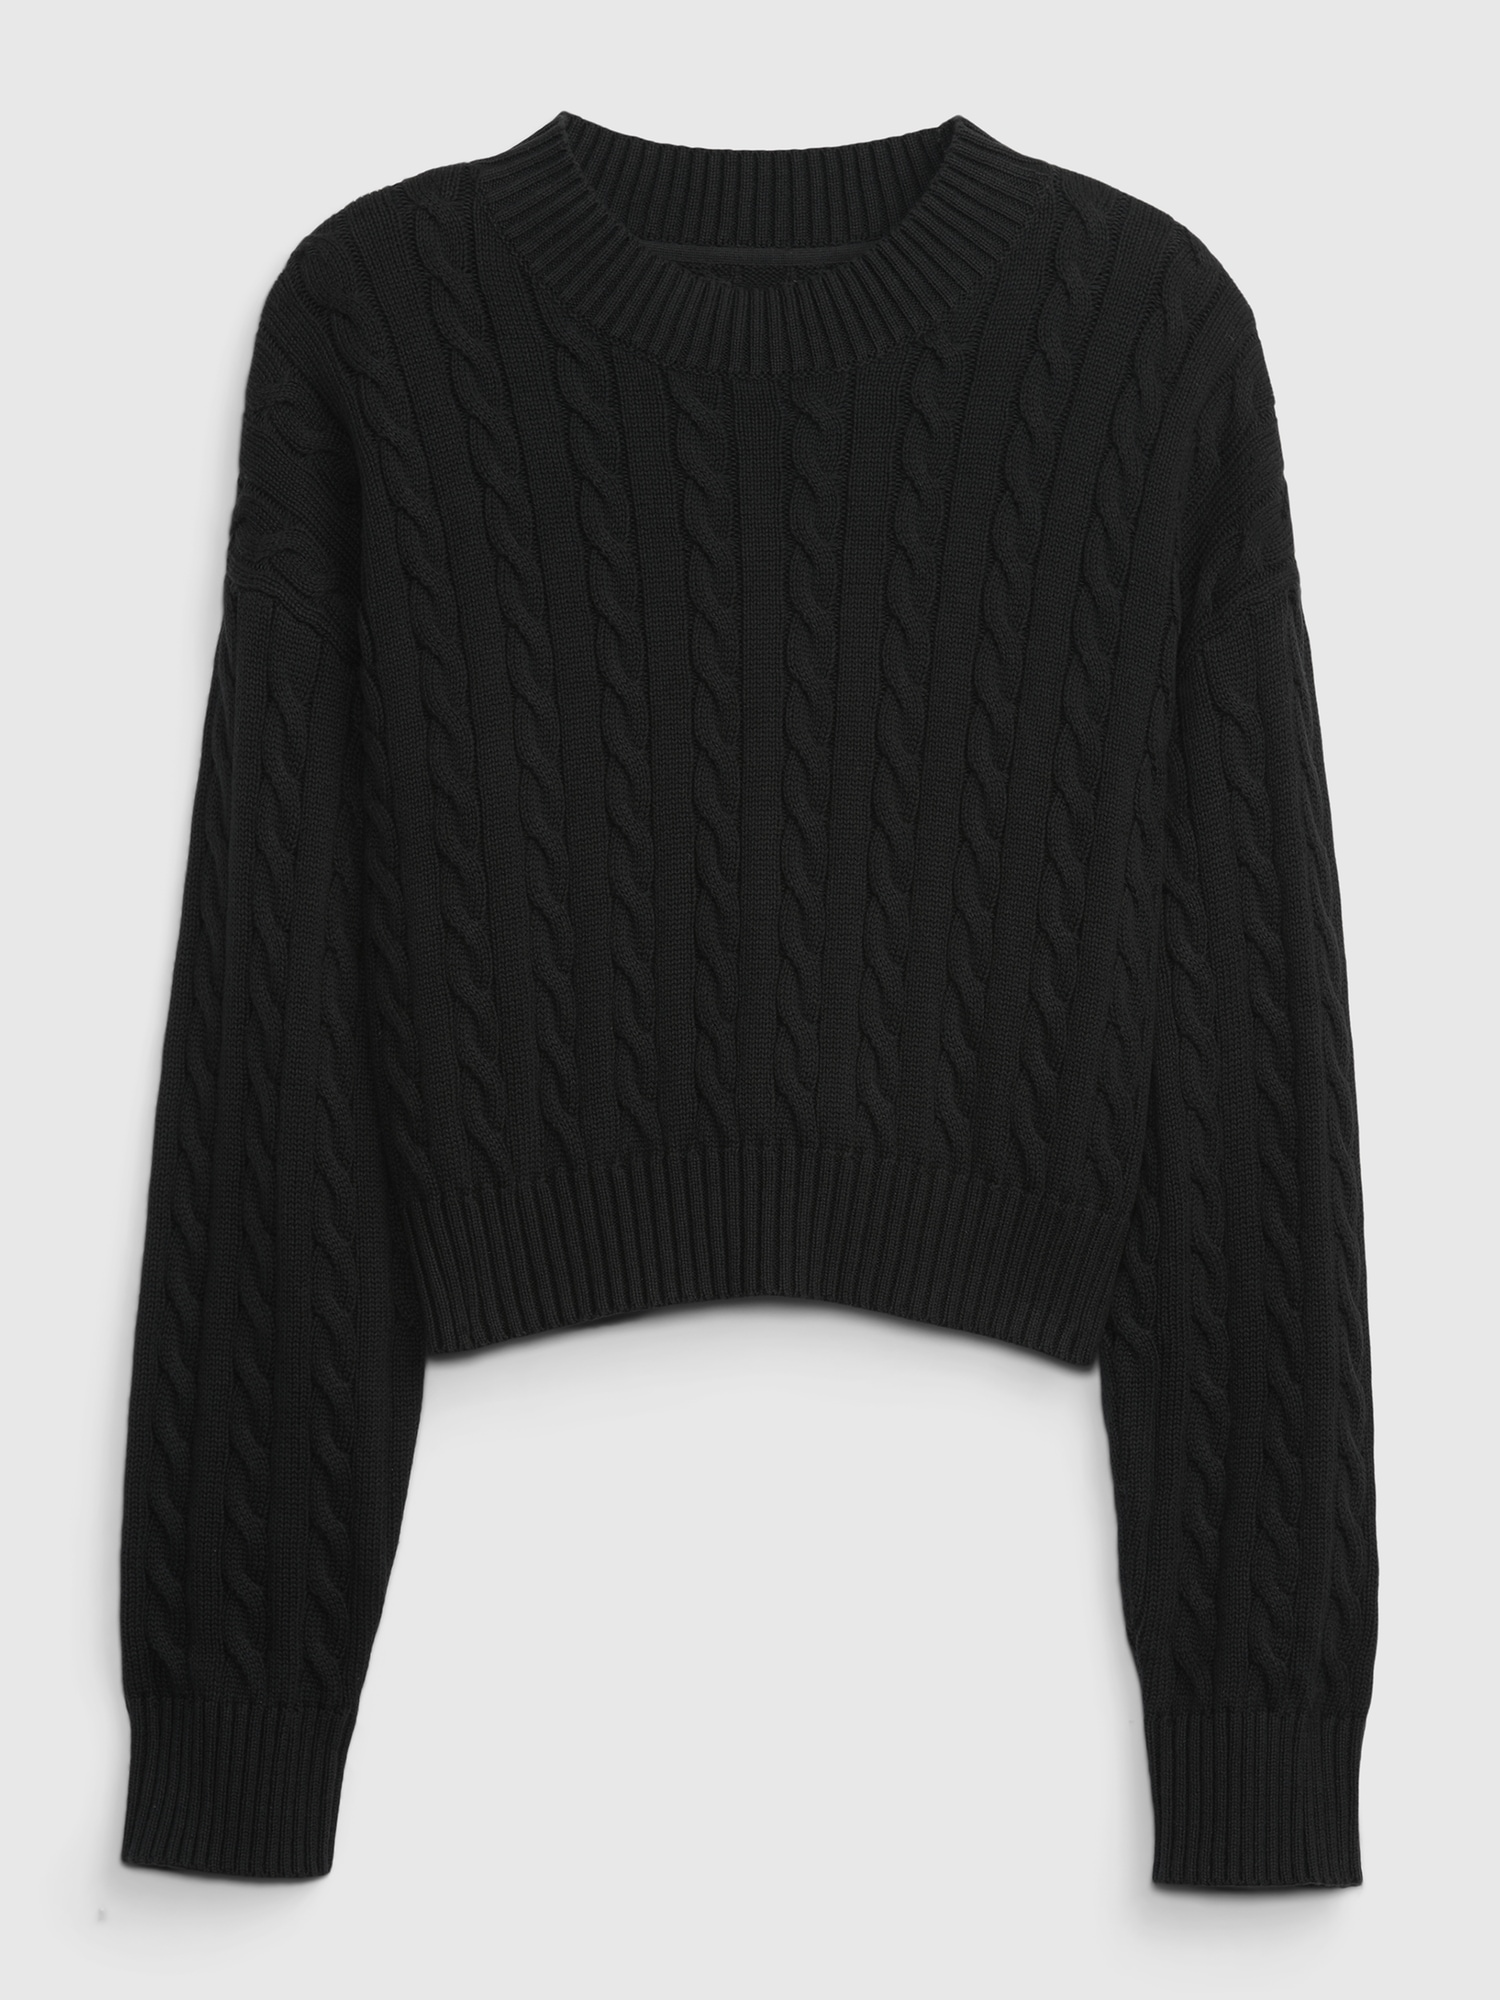 Teen 100% Organic Cotton Cable-Knit Sweater | Gap